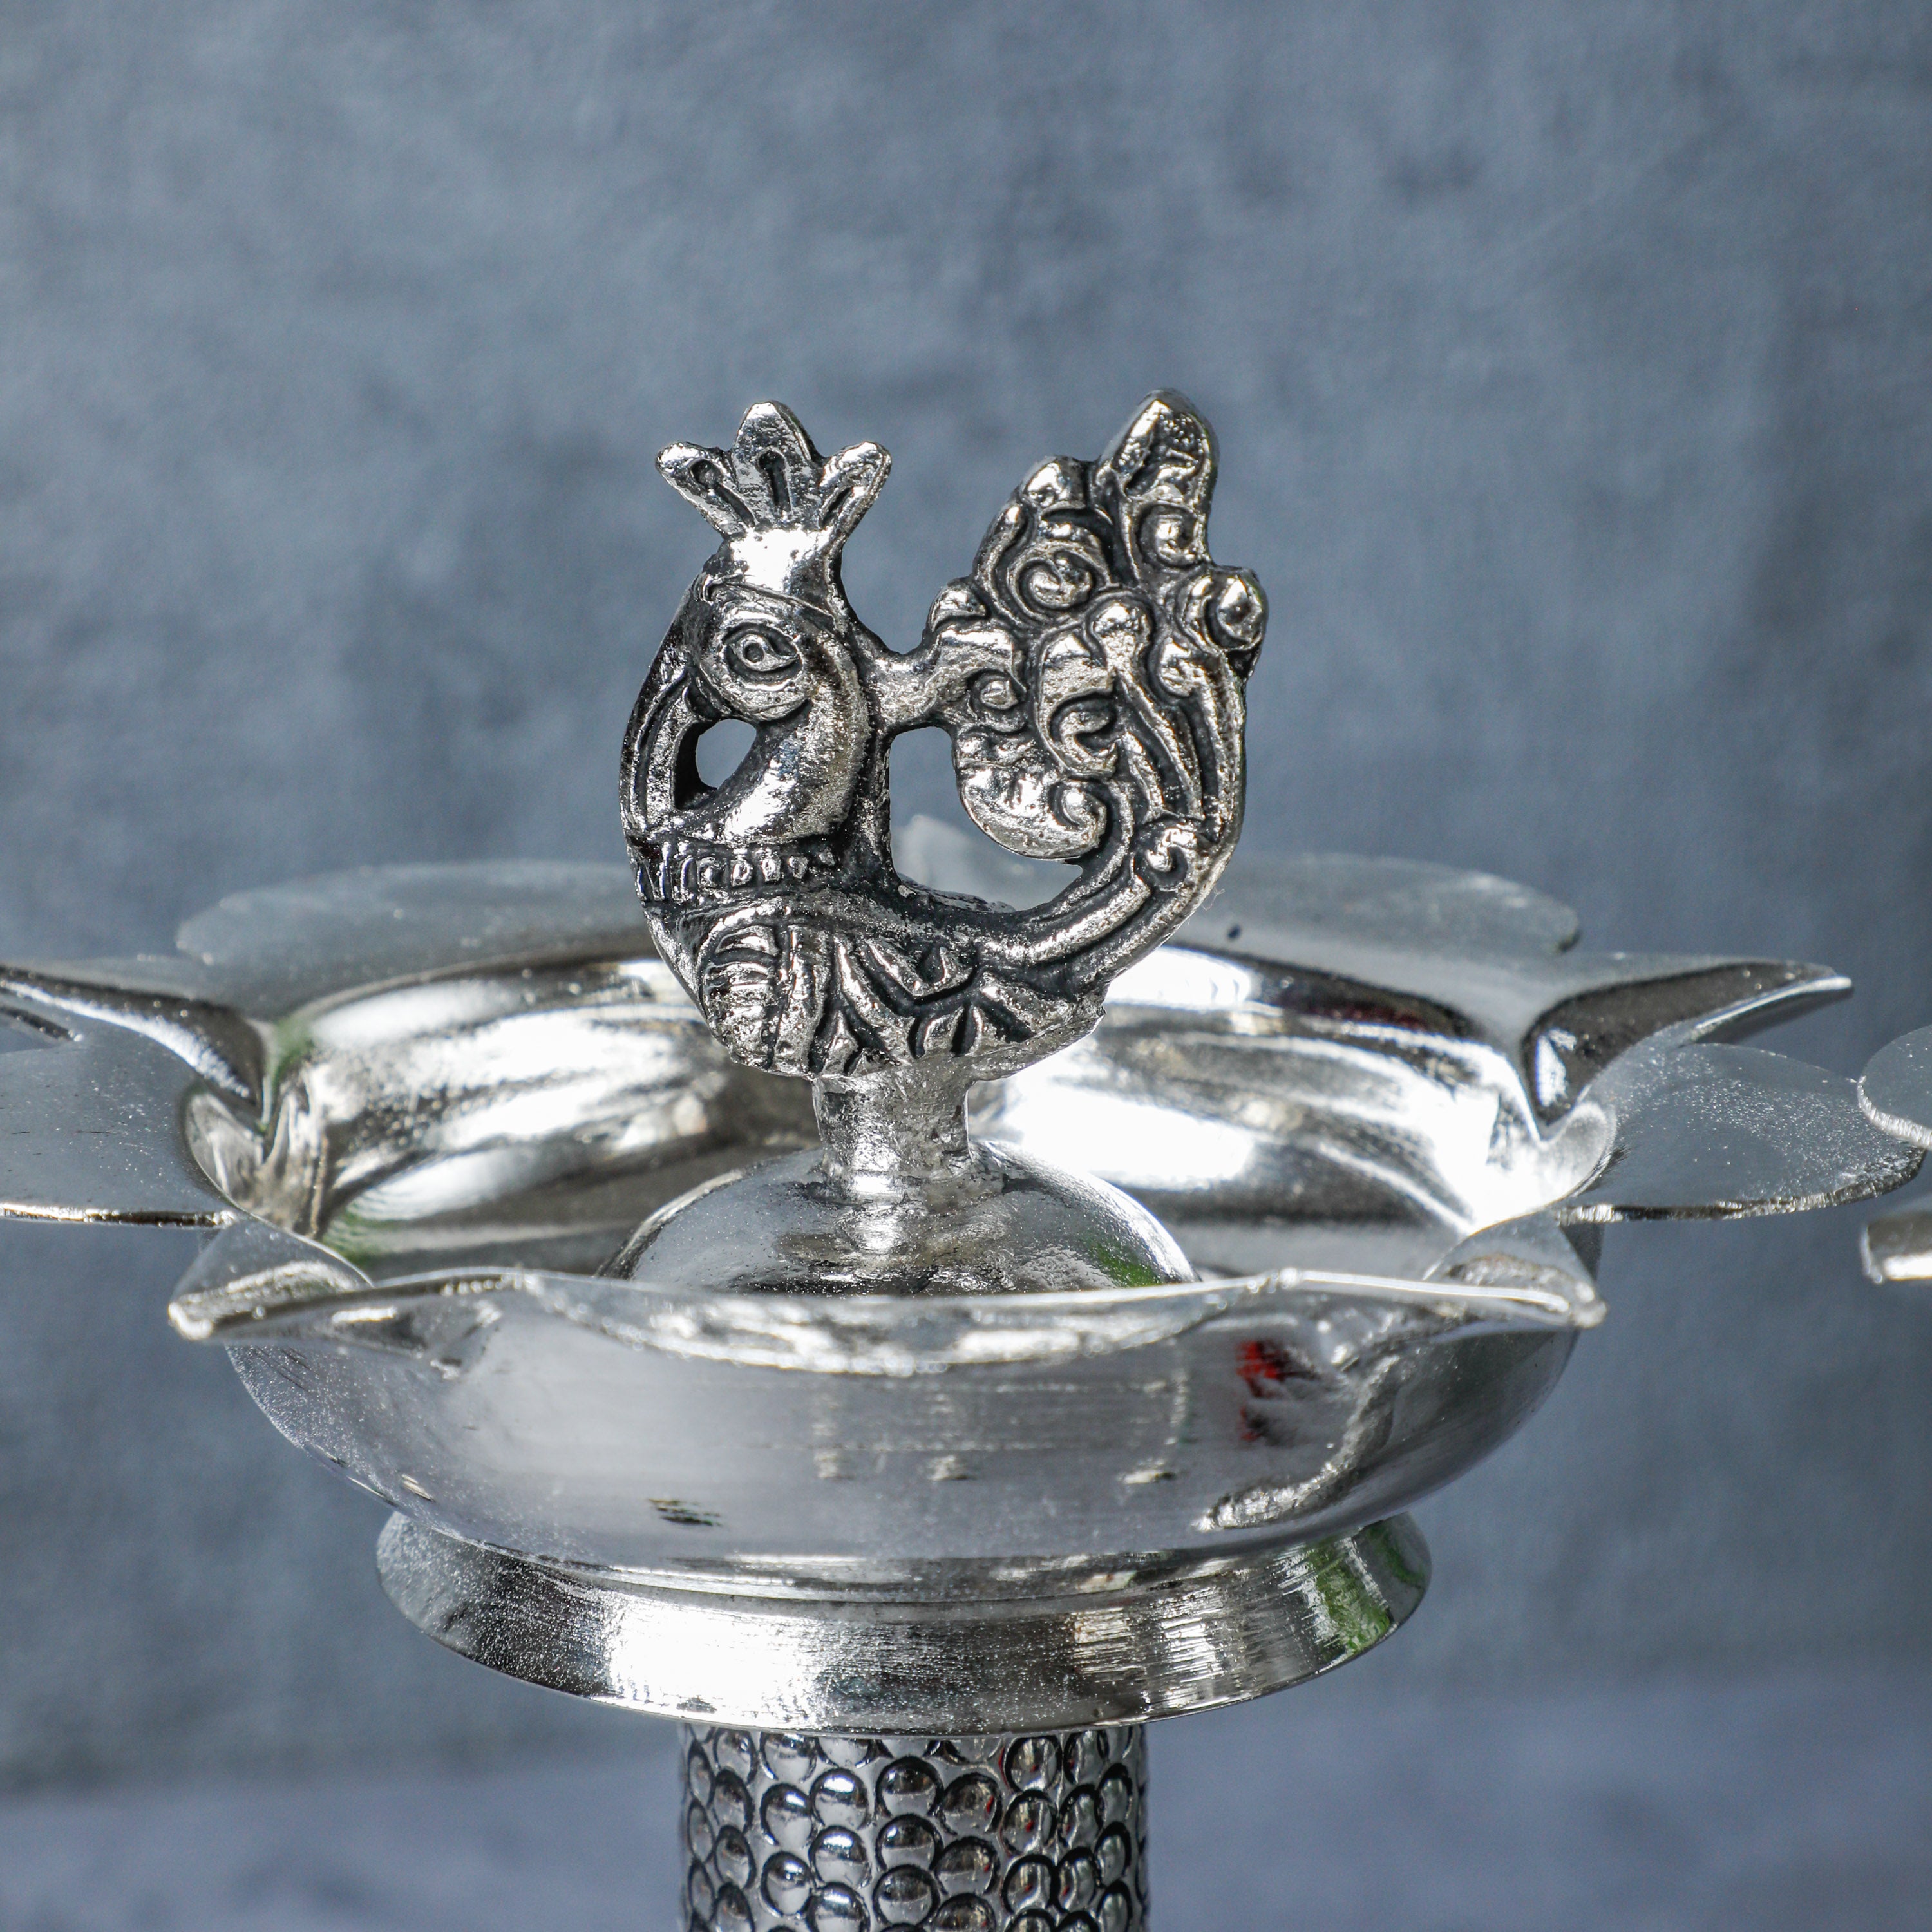 This peacock shaped diya is suitable for pooja and other auspicious occasions.